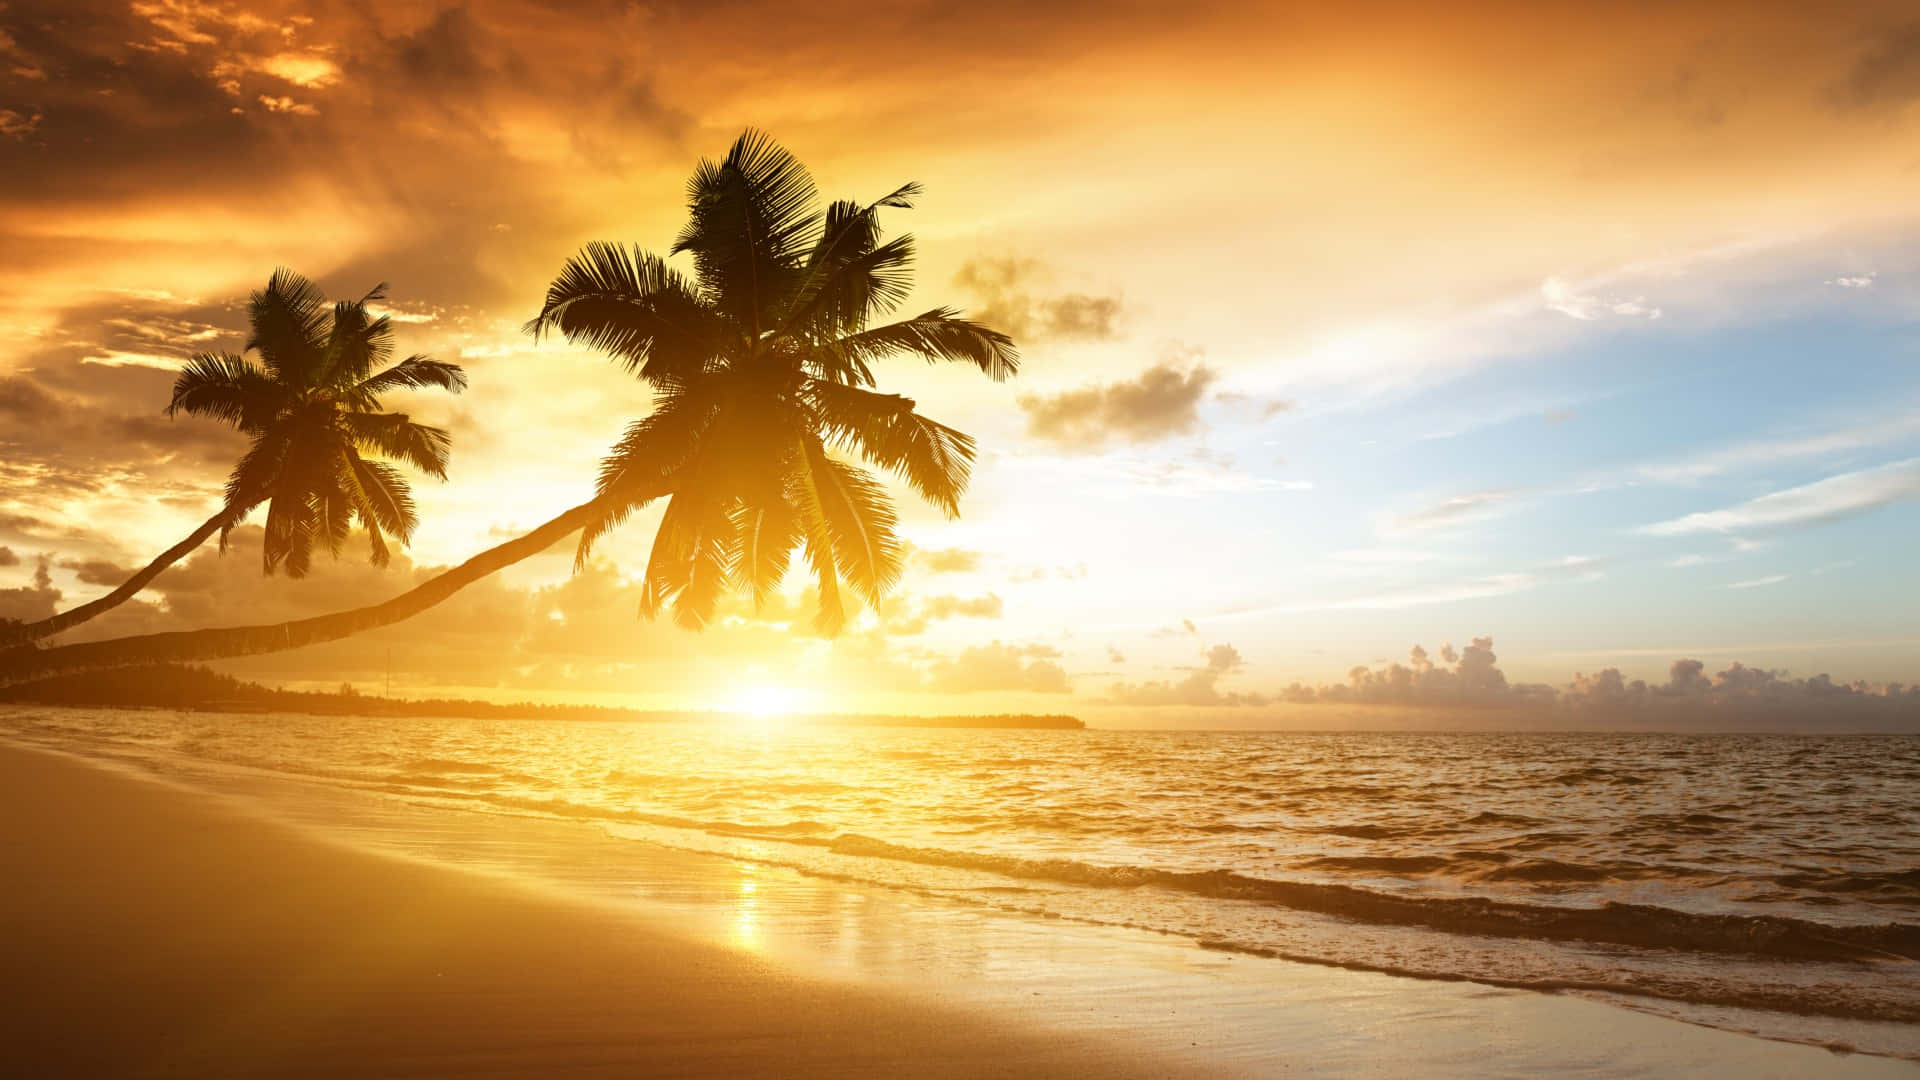 Two Palm Trees On A Beach At Sunset Wallpaper